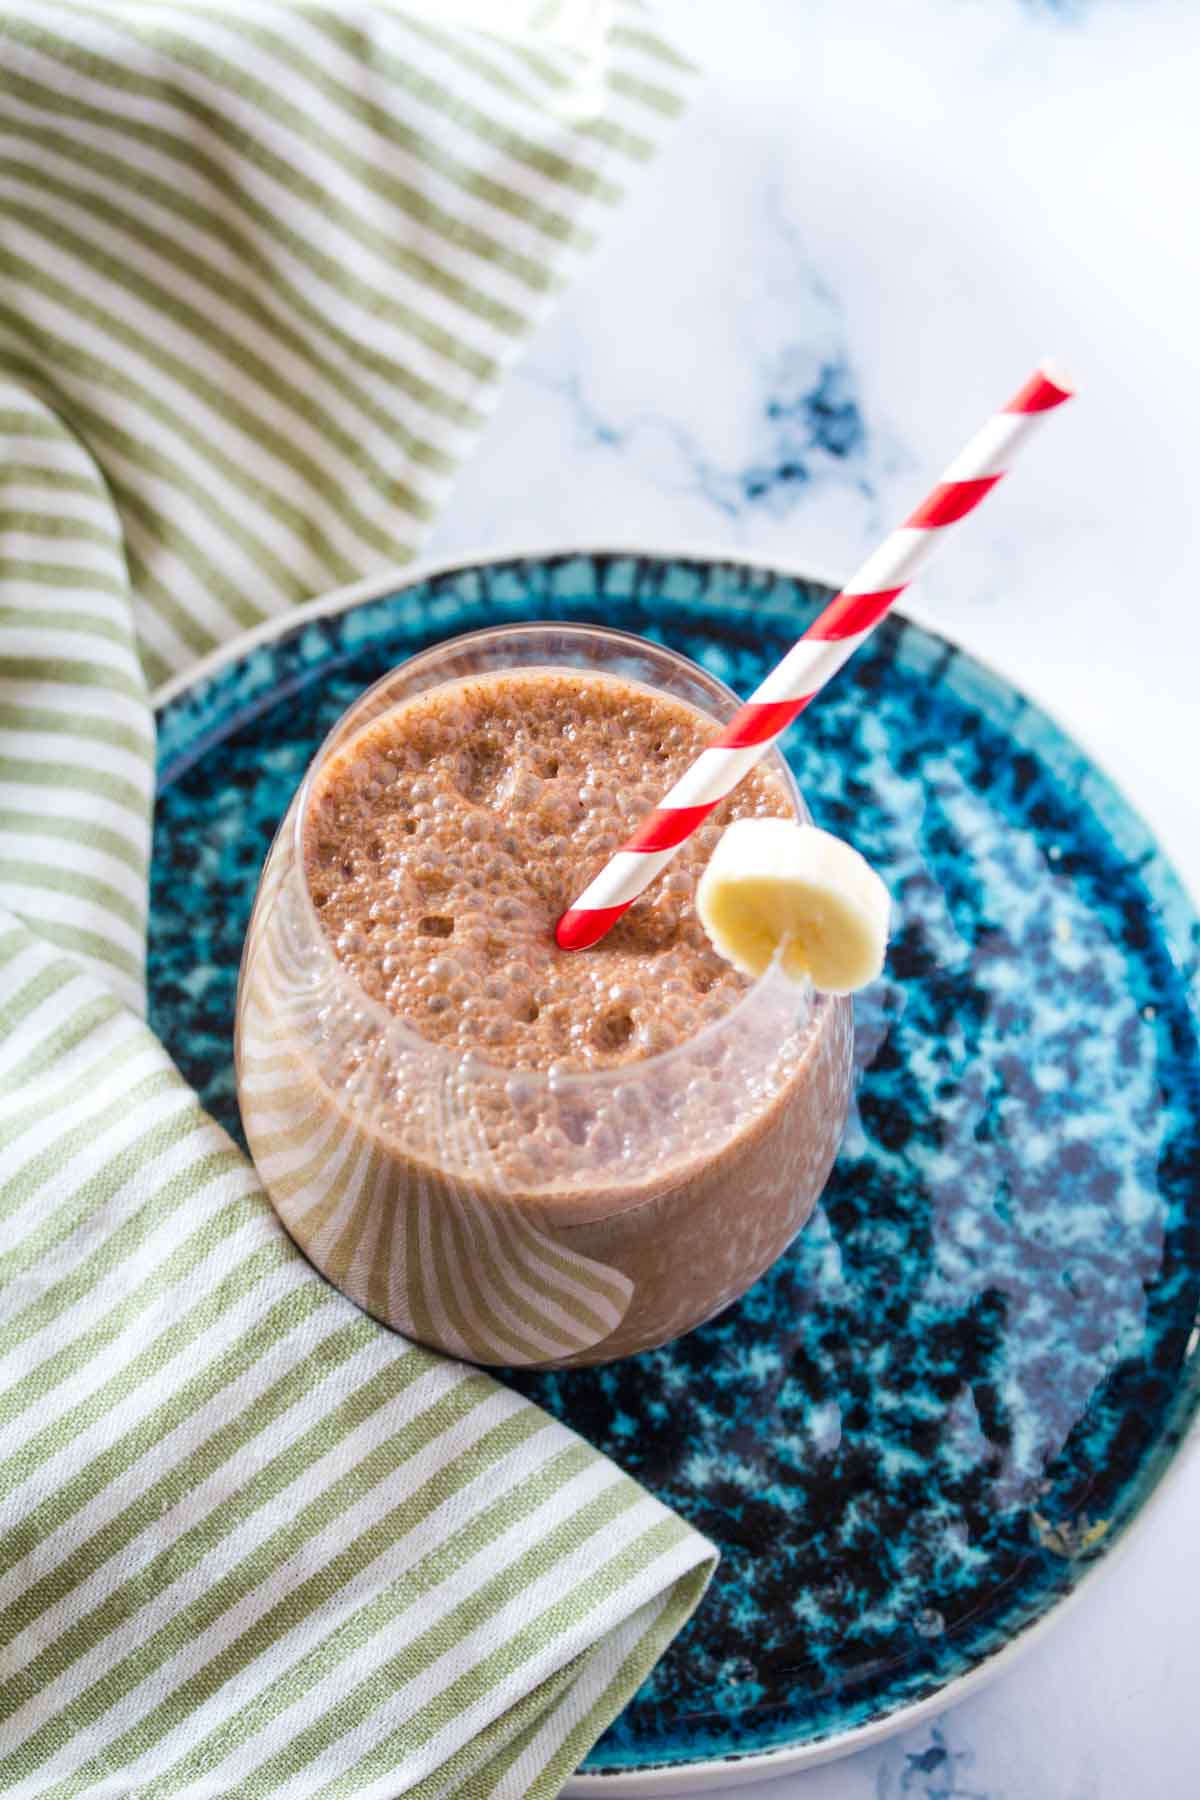 Coffee Smoothie in a round glass with a red and white striped straw.